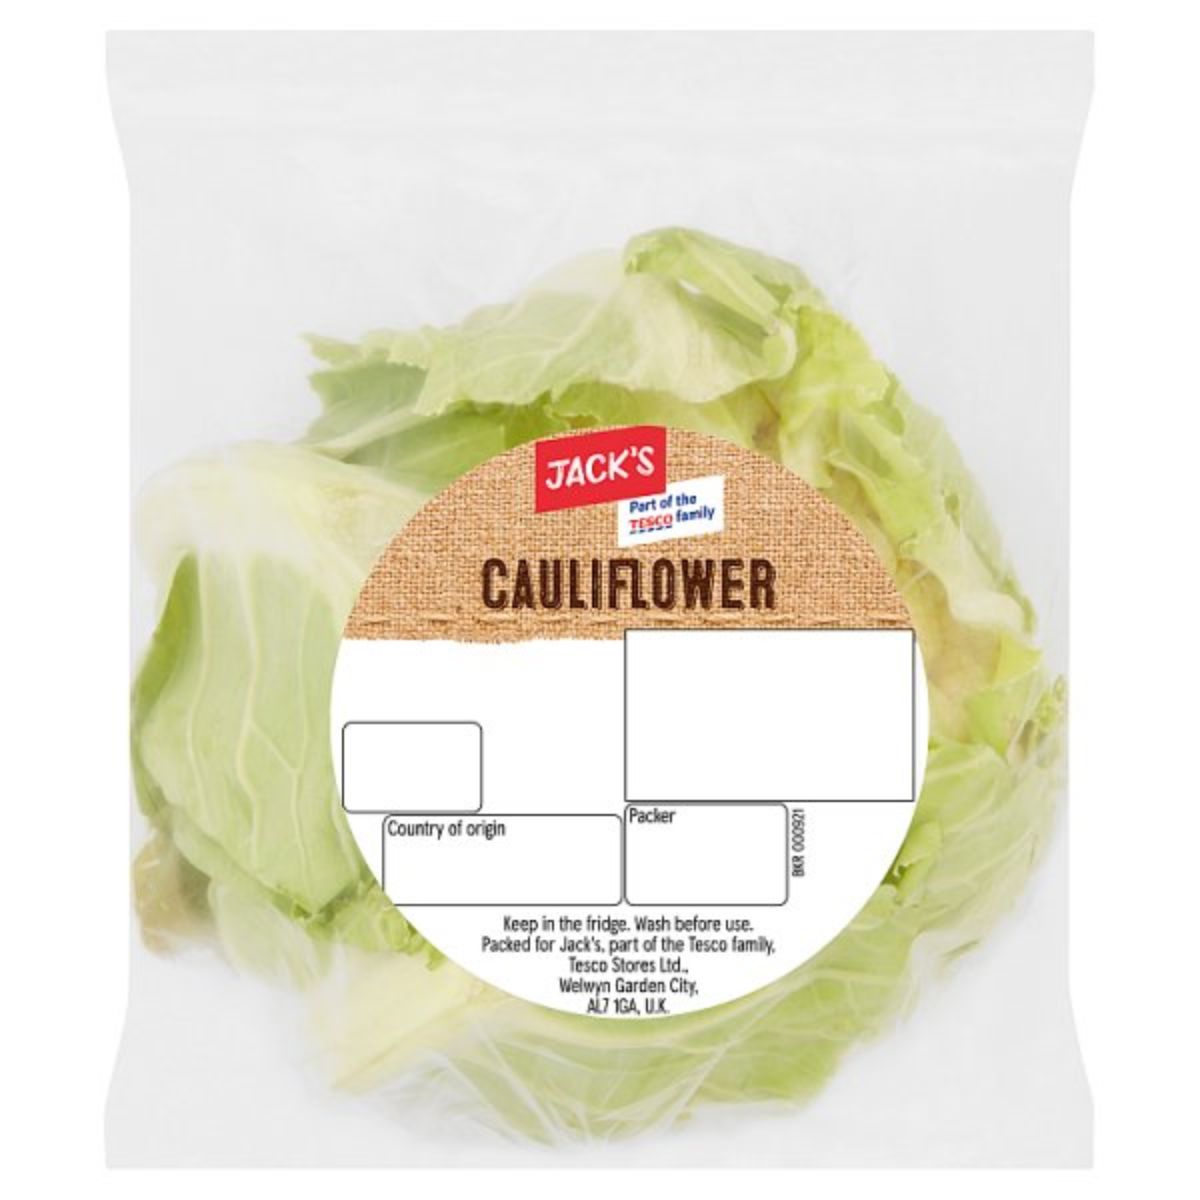 A bag of Jacks - Cauliflower - 1pcs with a label on it.